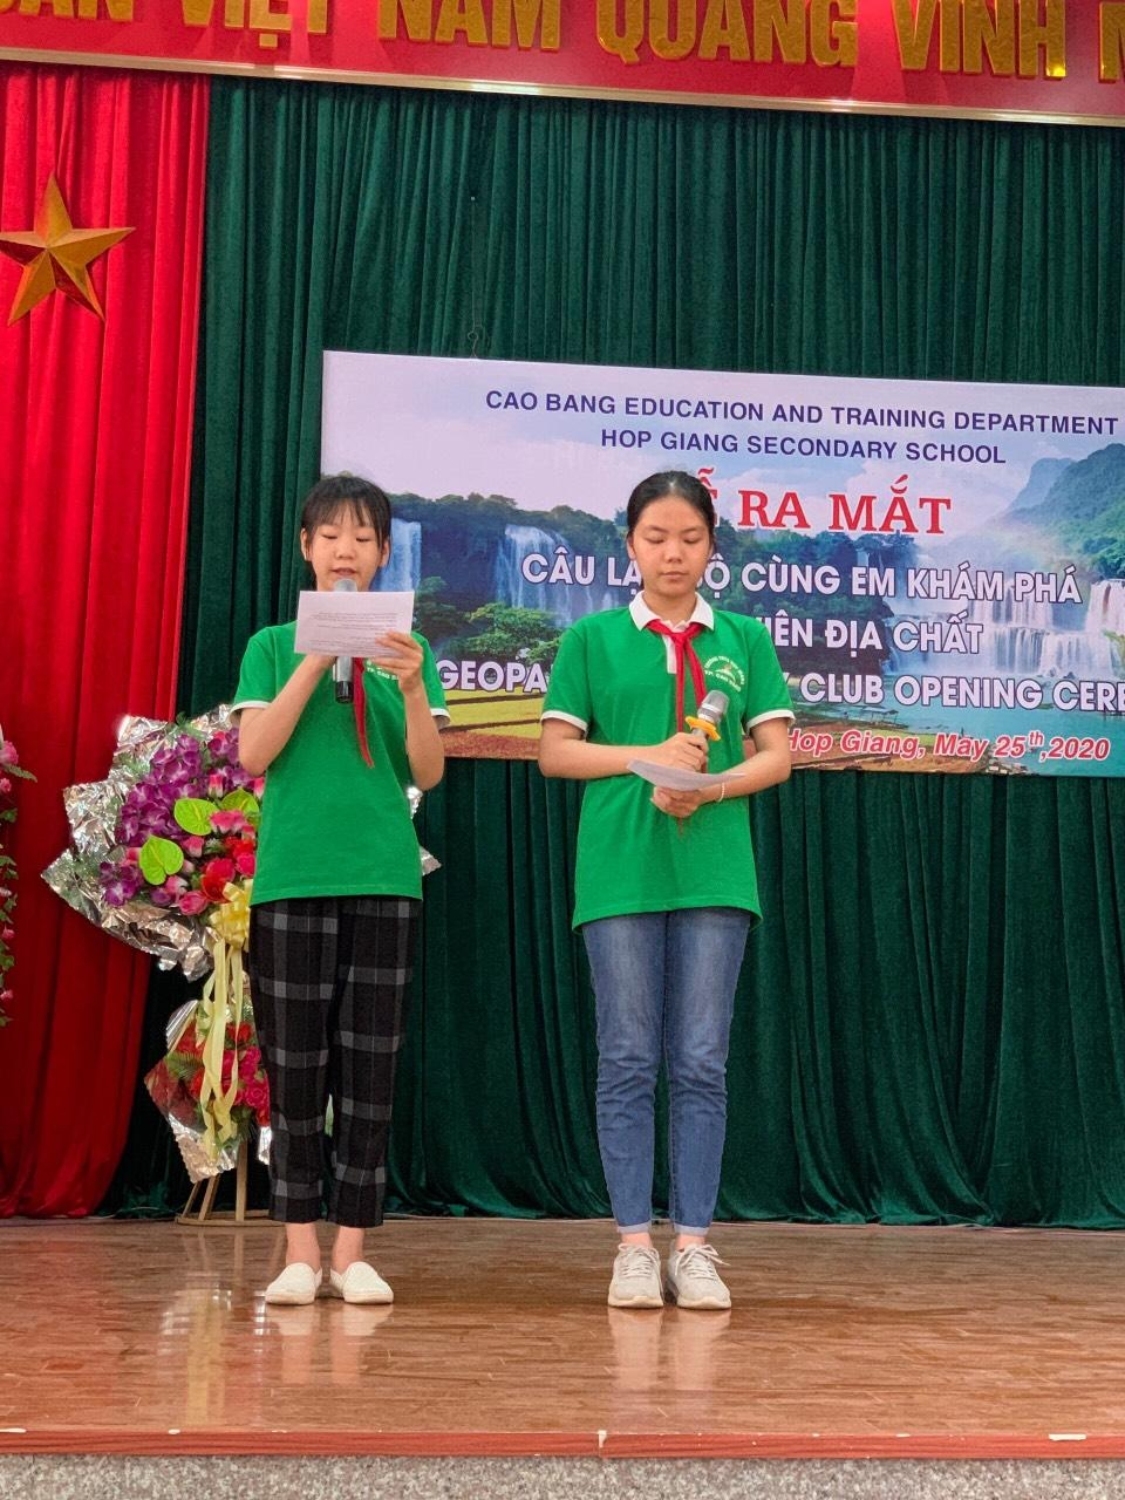 OPENING CEREMONY OF "GEOPARK DISCOVERY CLUB" IN HOP GIANG SECONDARY SCHOOL